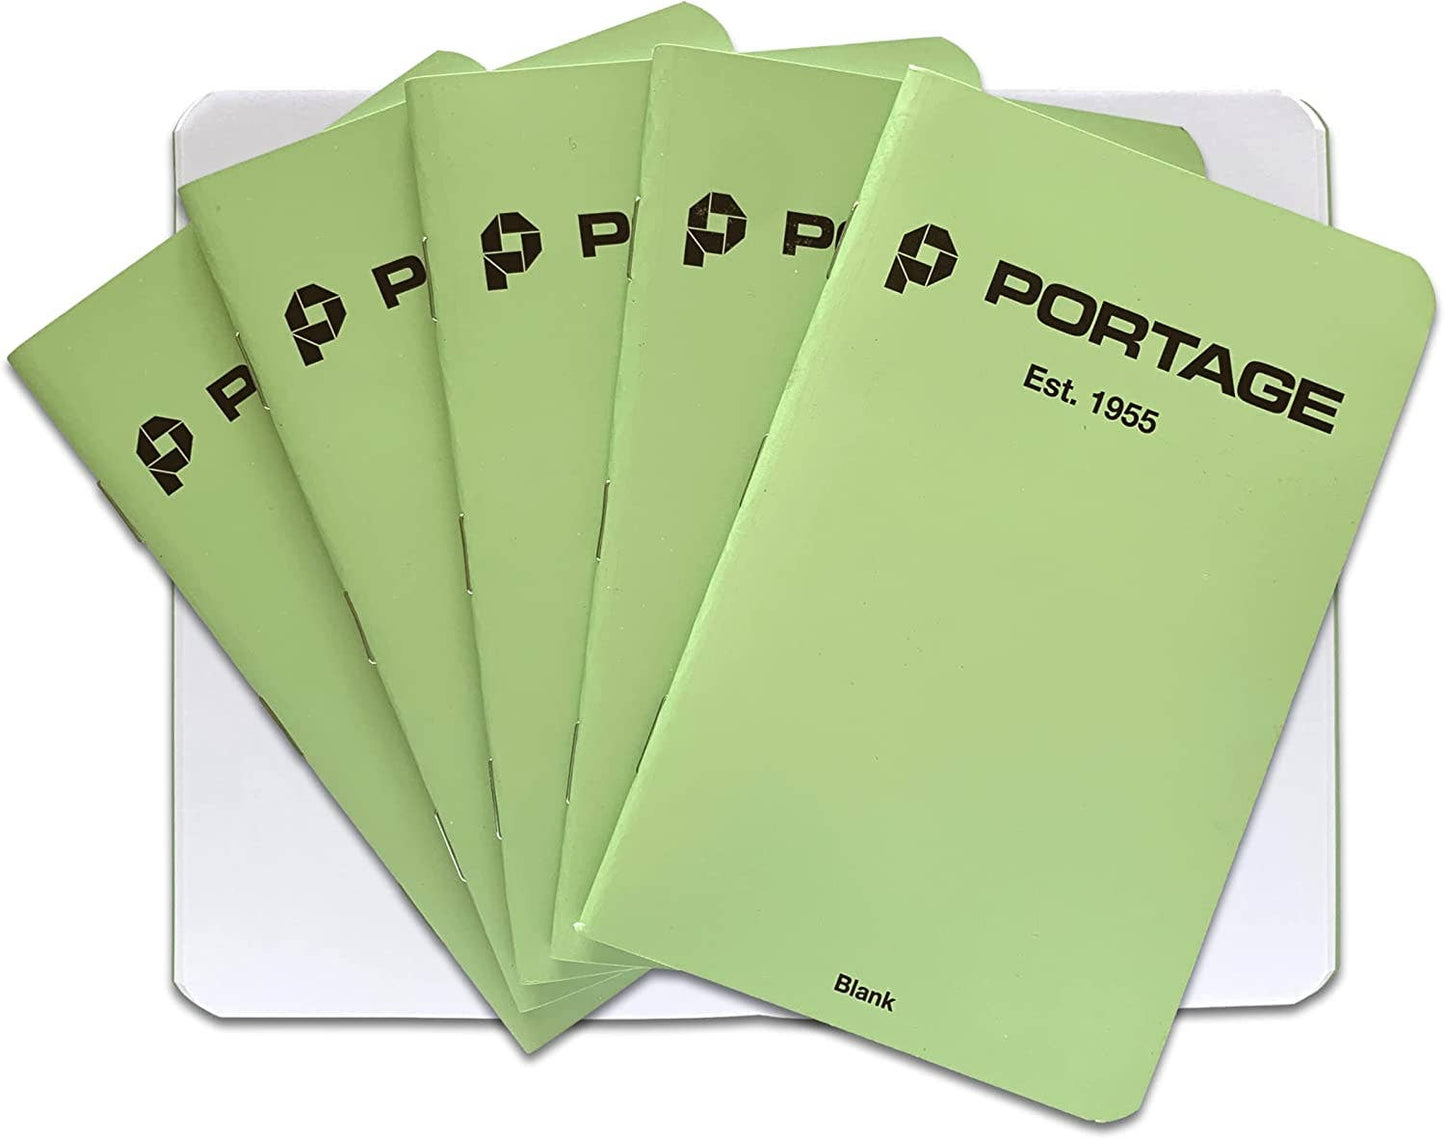 Portage Notebooks - Notepad for Field Notes | 3.5" x 5.5" | 64 Pages (6 Pack)